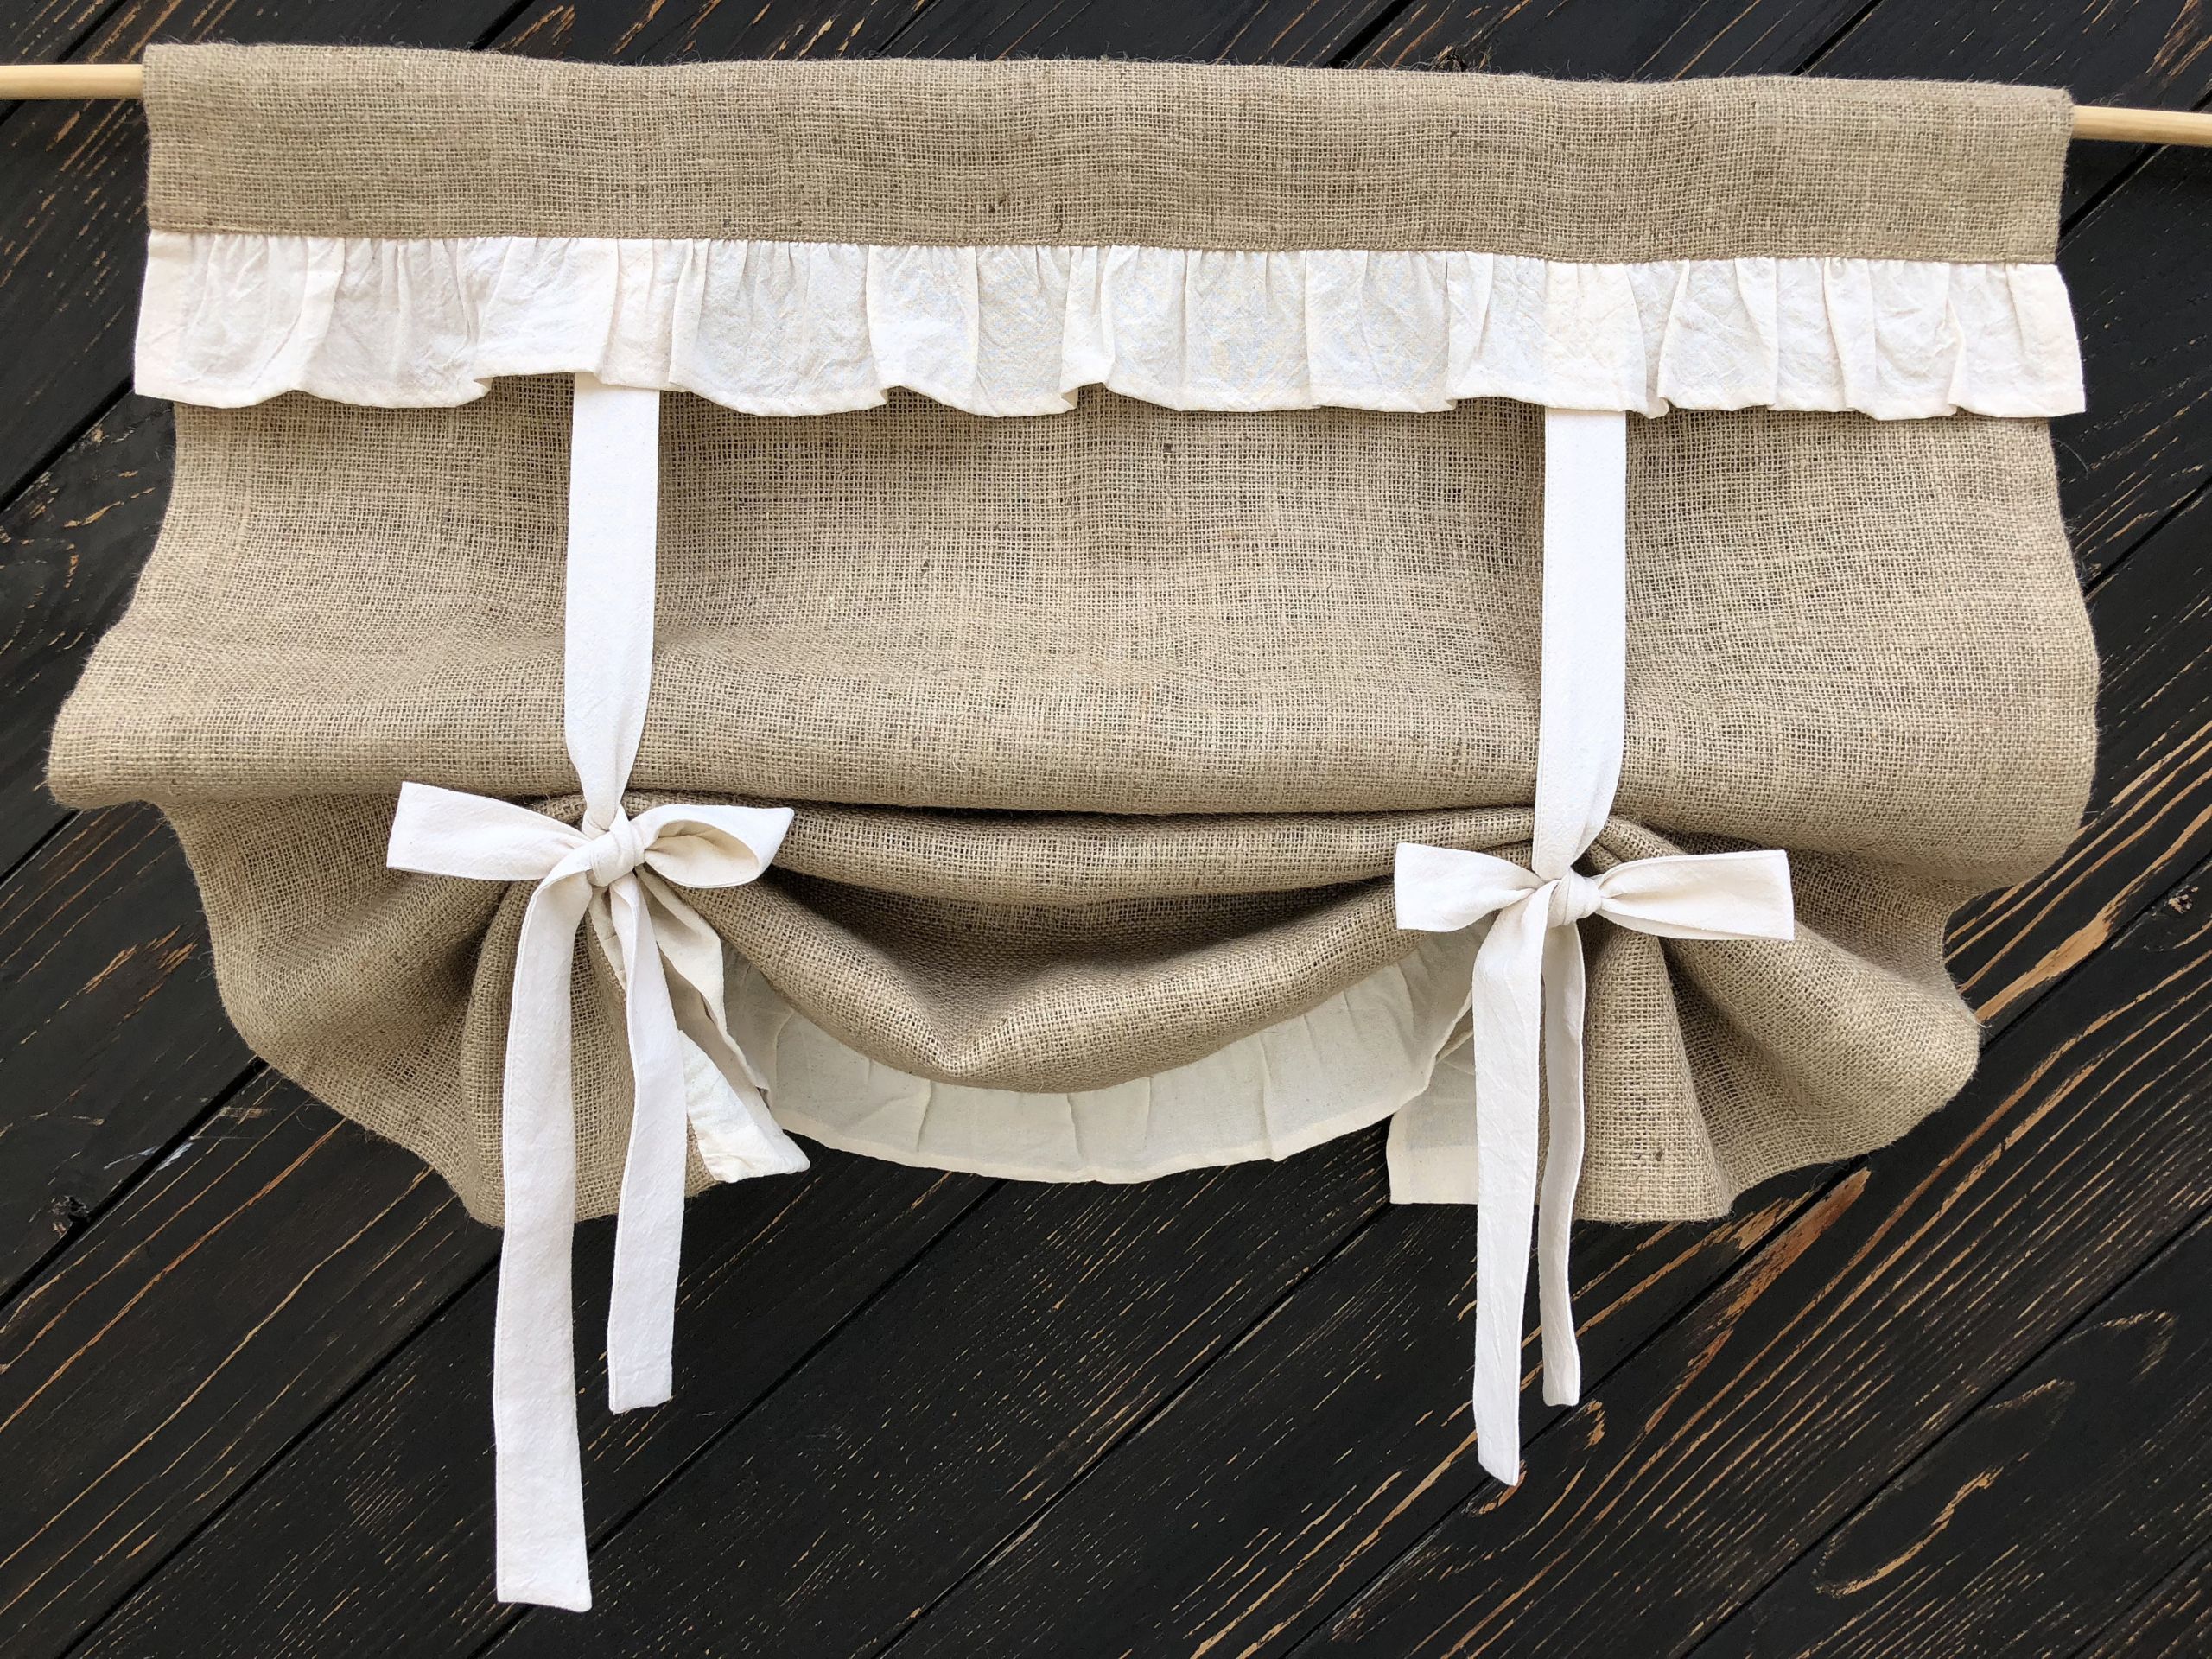 Ruffled Kitchen Curtains
 Burlap Curtains Ruffled Country Kitchen Tie Up Valance